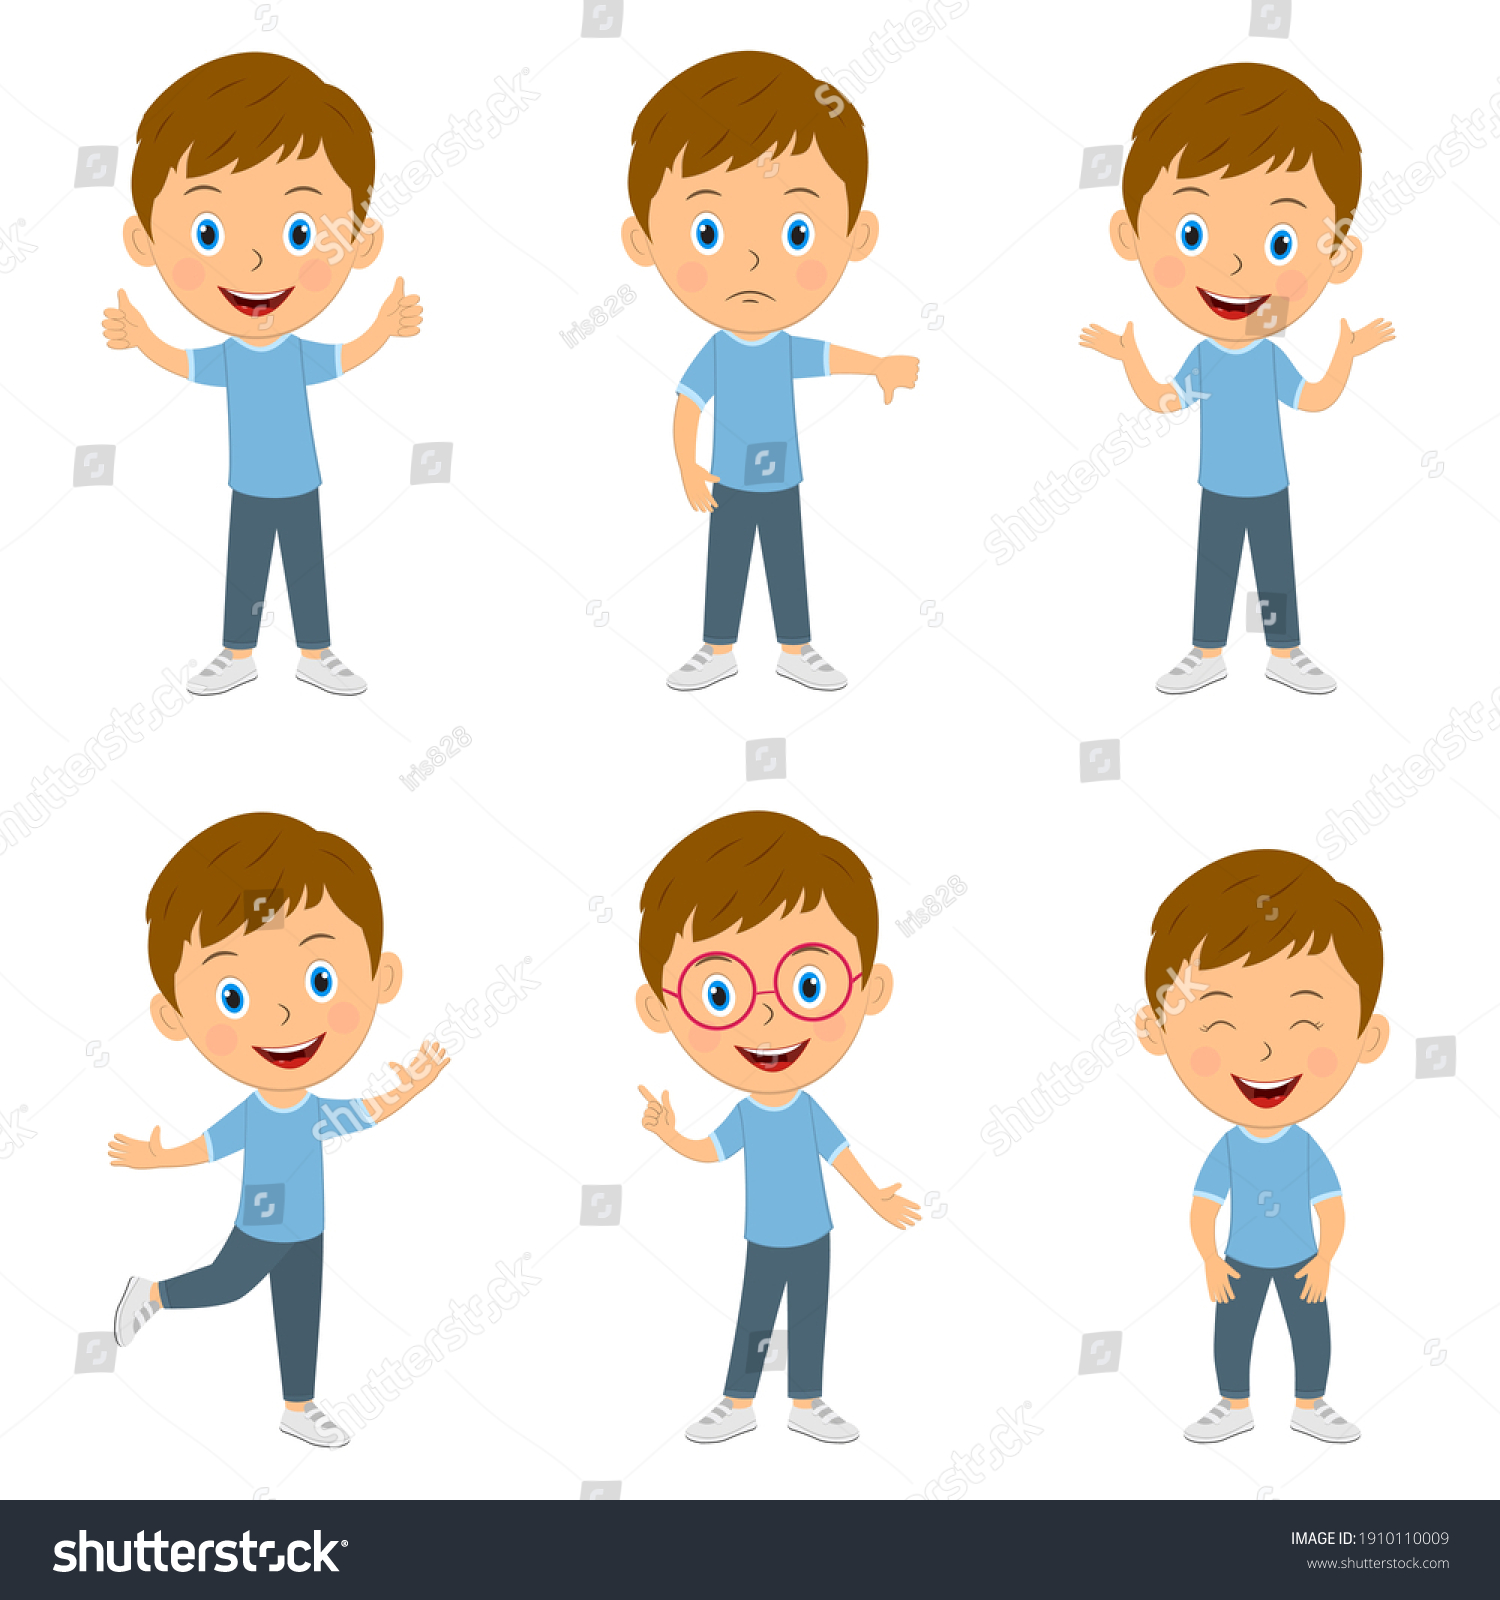 1,361,226 Child expression Images, Stock Photos & Vectors | Shutterstock